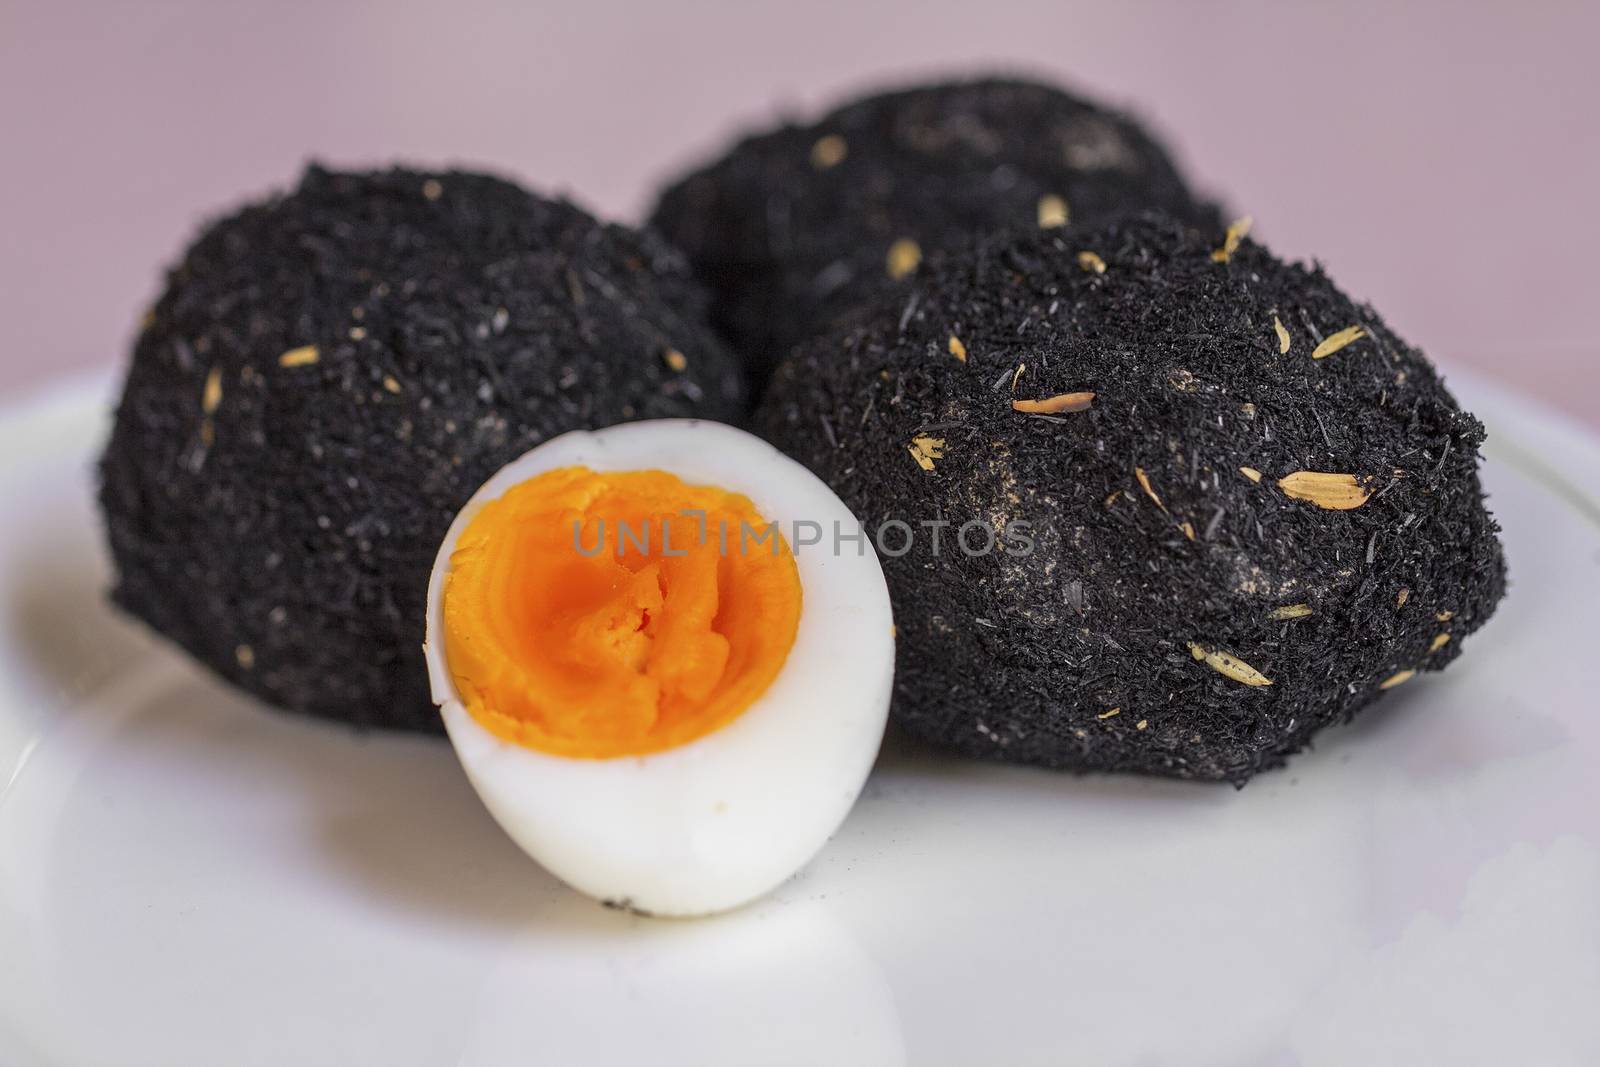 Preserved salted duck eggs with chaff and ashes - Thai recipe